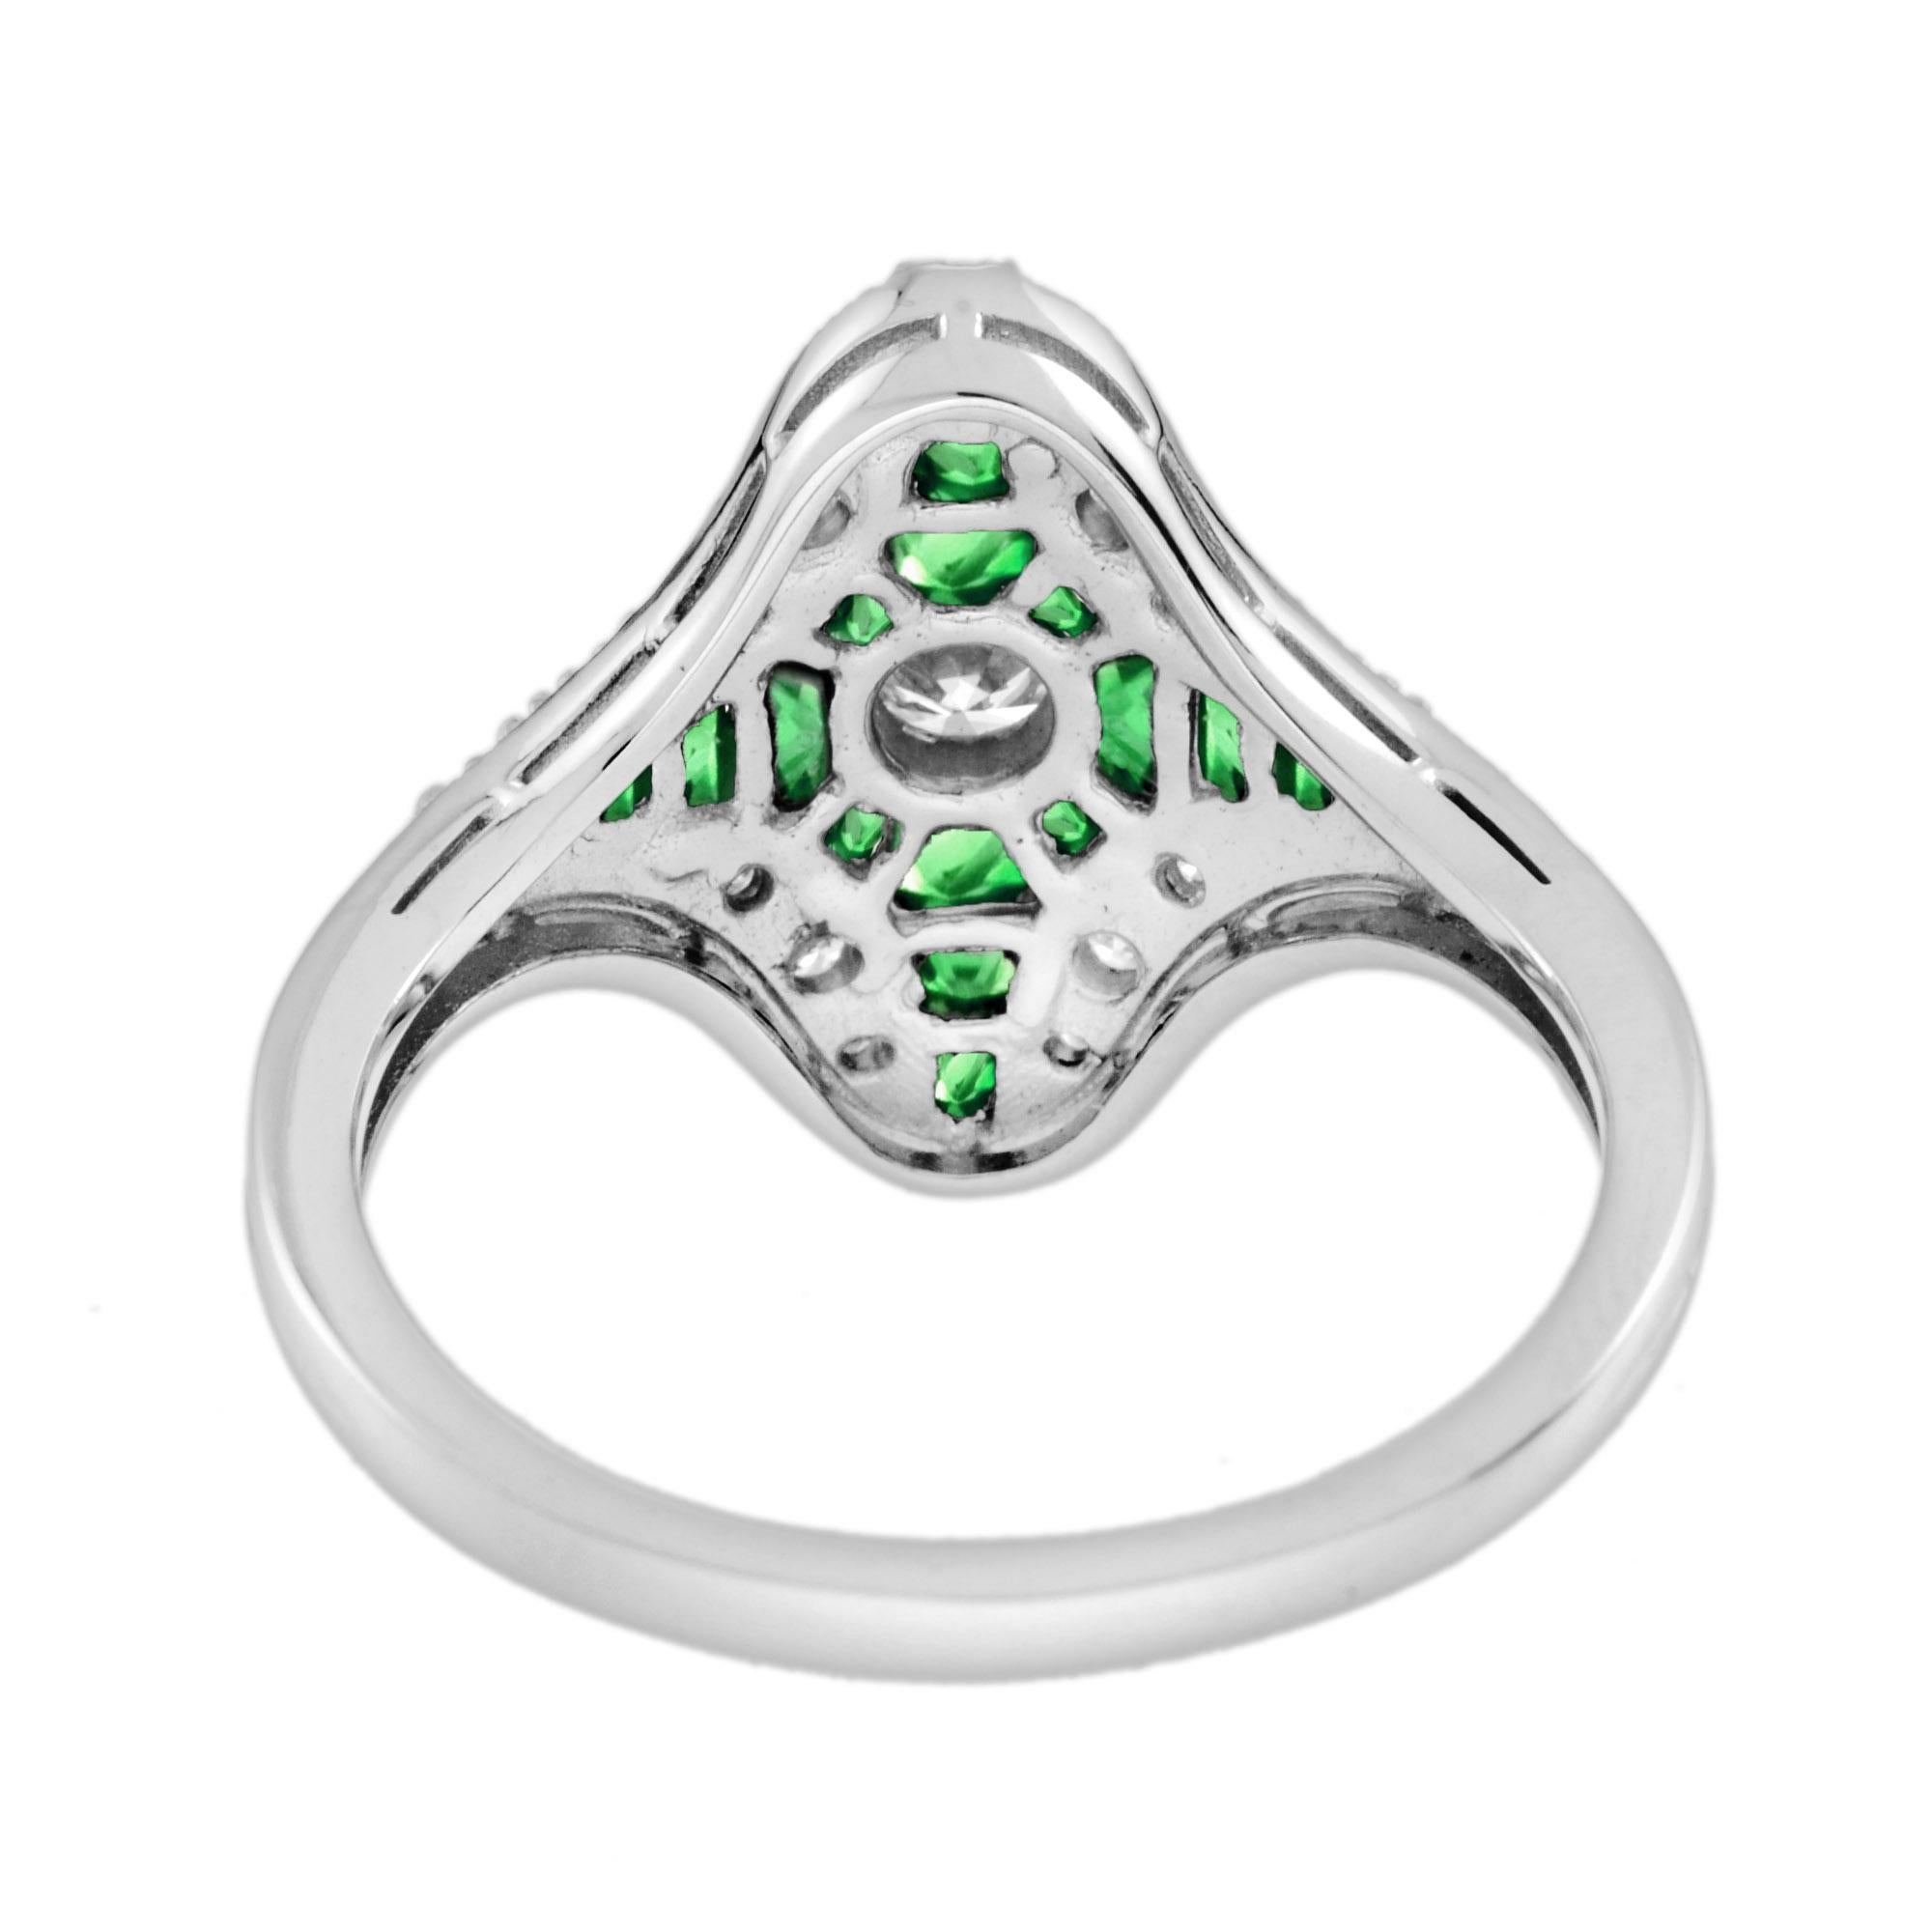 For Sale:  Diamond and Emerald Art Deco Style Ring in 14K white Gold 5